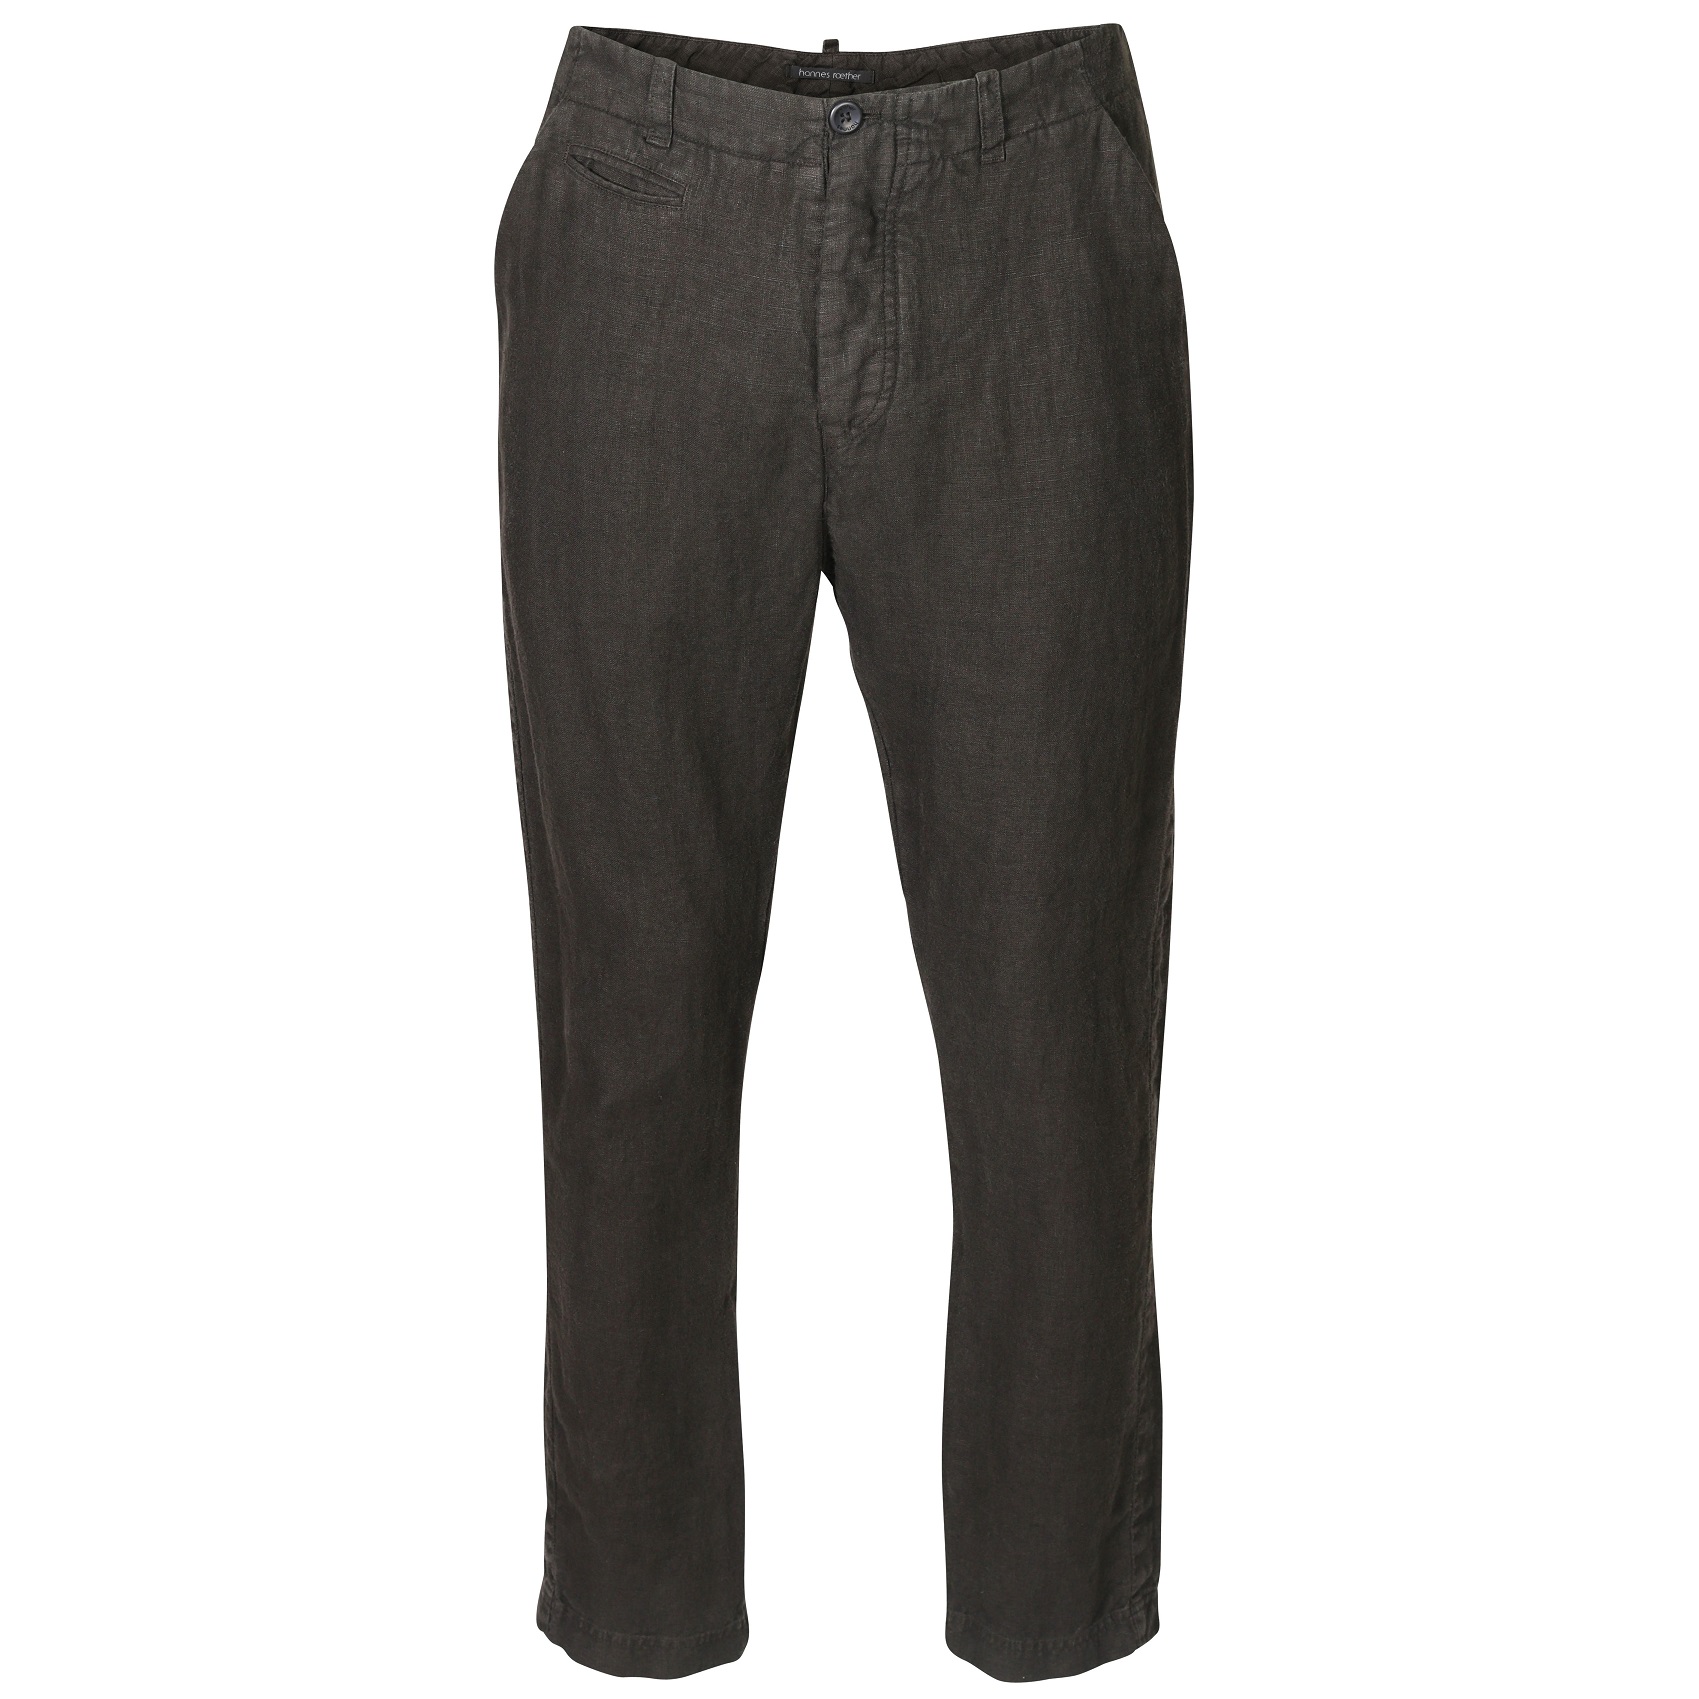 HANNES ROETHER Linen Pant in Dark Olive S